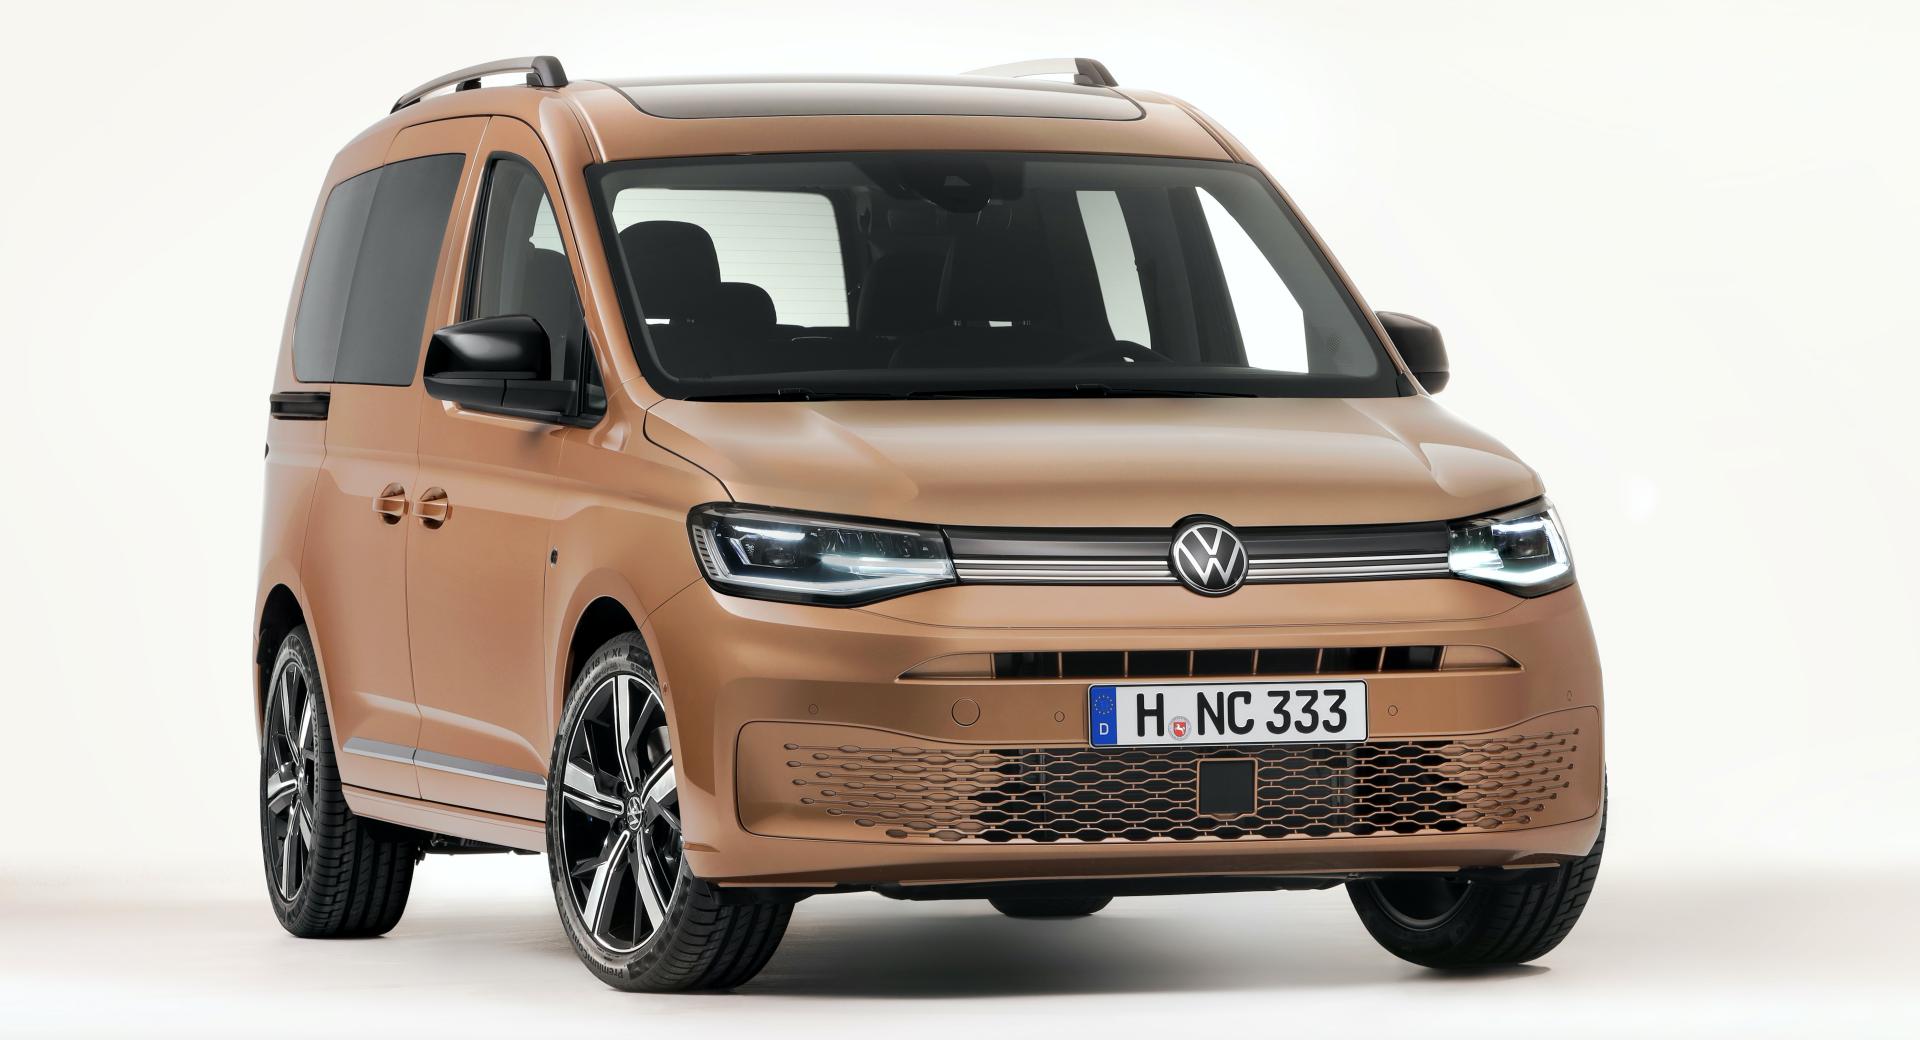 New 2021 VW Caddy Wraps MQB Underpinnings In Evolutionary ...